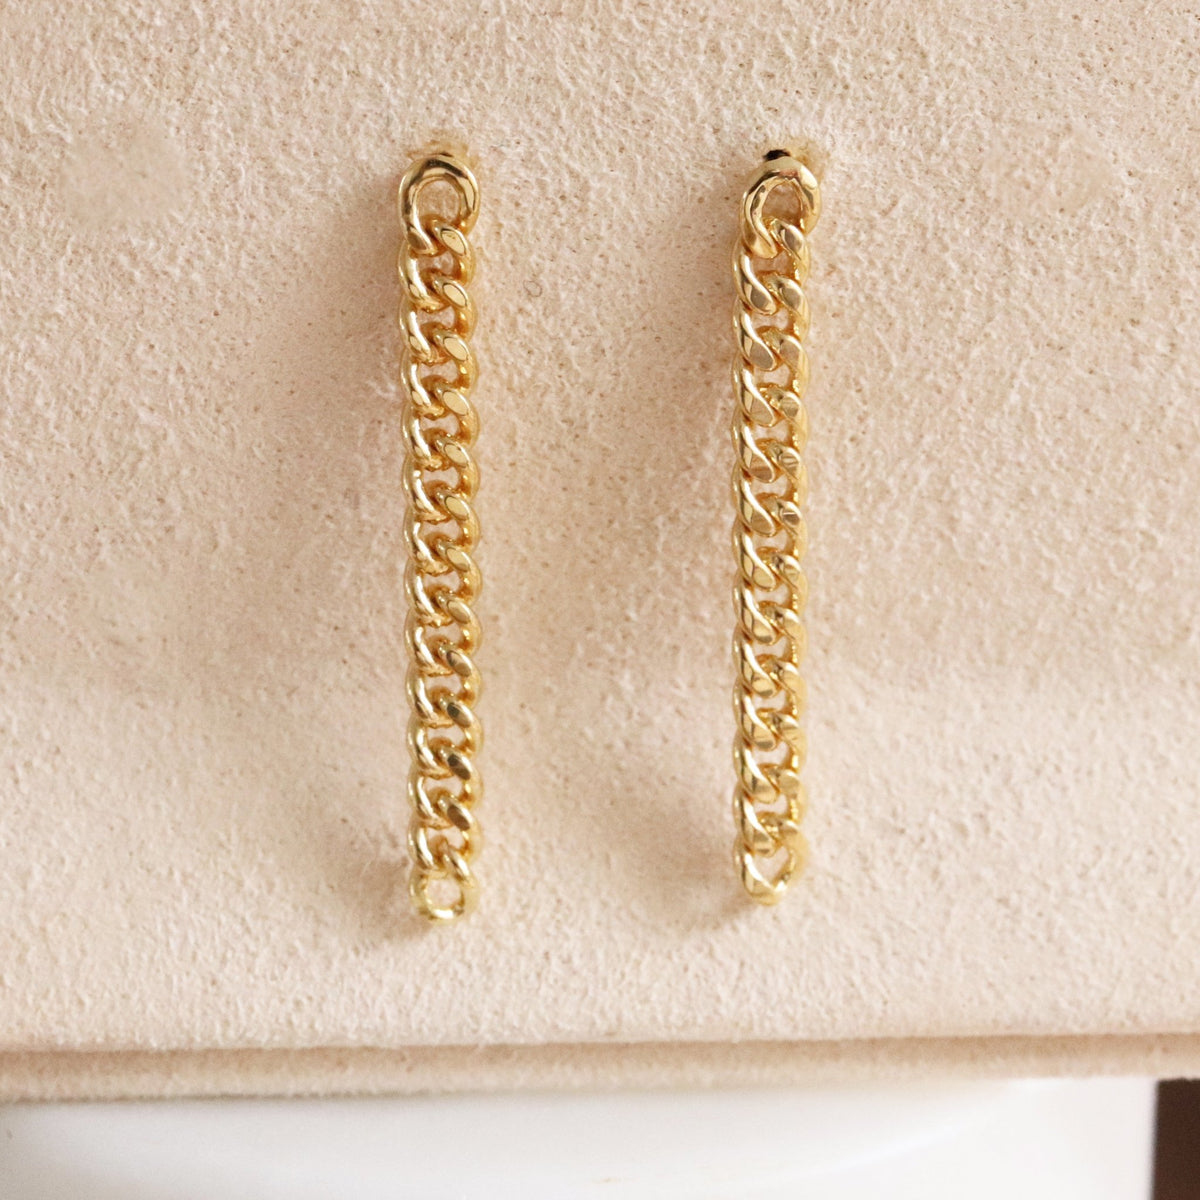 POISE CABLE LINK CHAIN DROP STUDS - GOLD - SO PRETTY CARA COTTER